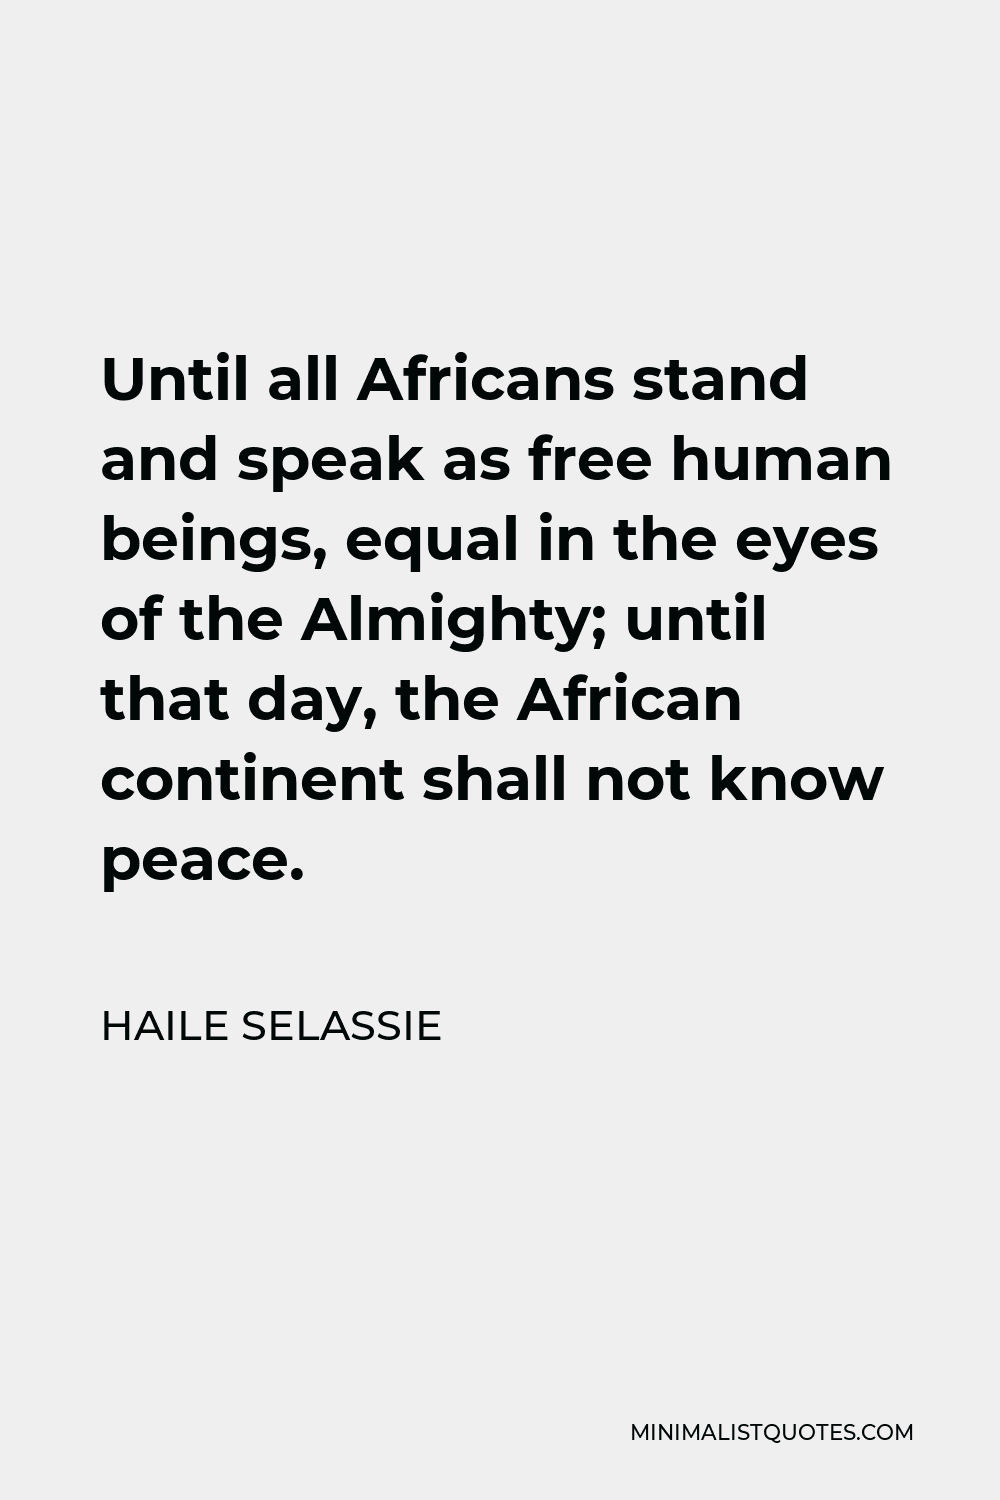 Haile Selassie Quote - Until all Africans stand and speak as free human beings, equal in the eyes of the Almighty; until that day, the African continent shall not know peace.